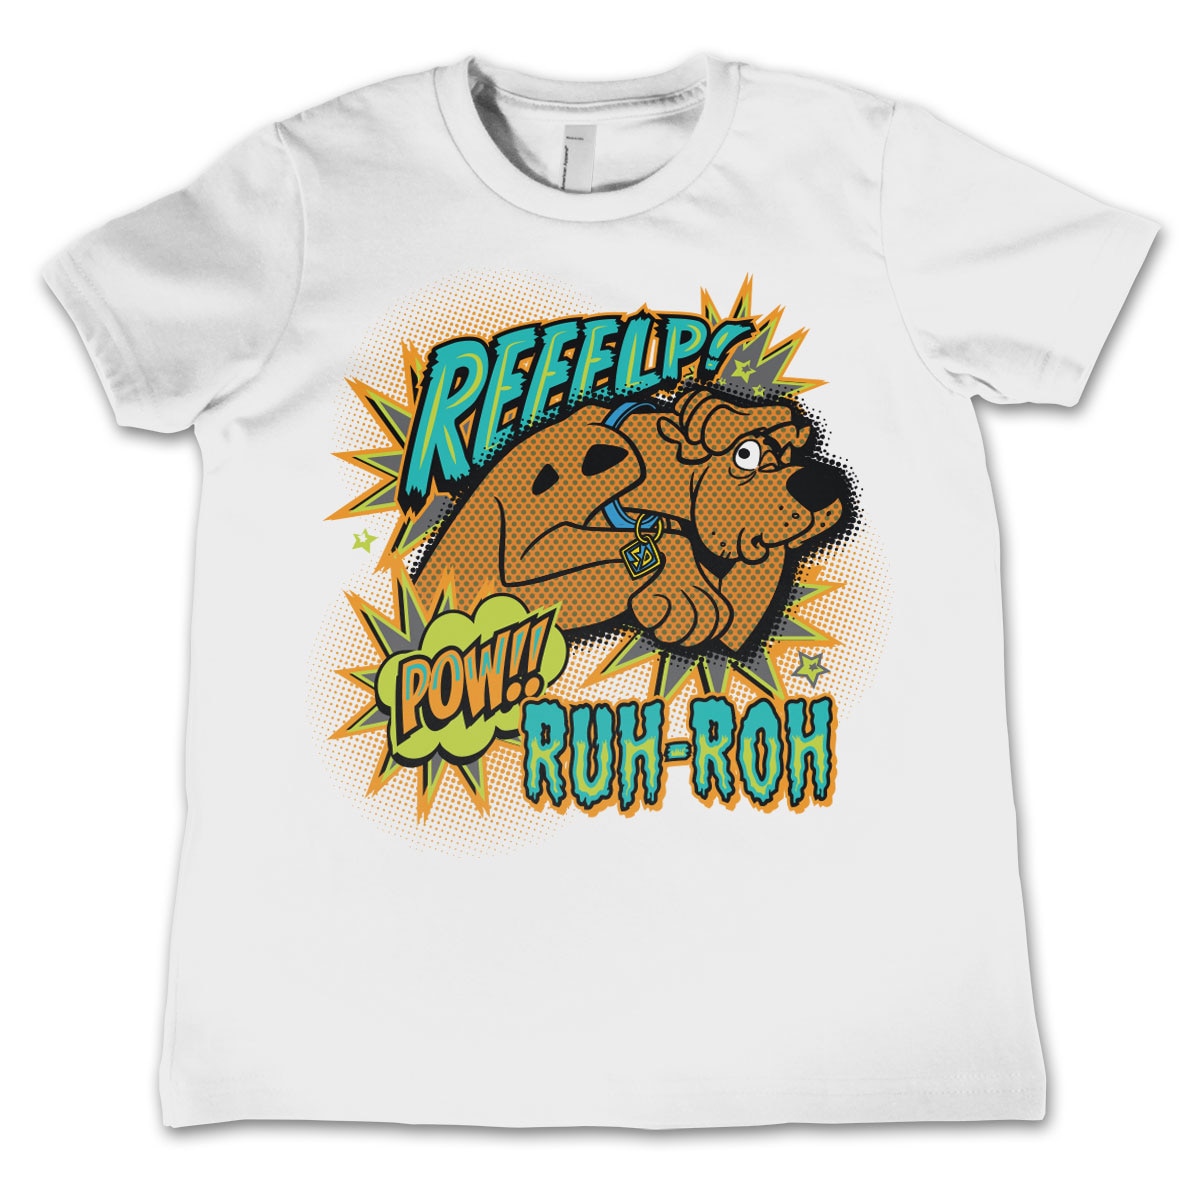 Officially Licensed Scooby Doo Scooby Doo Reeelp Kids T-Shirt Age 3-12 Years 